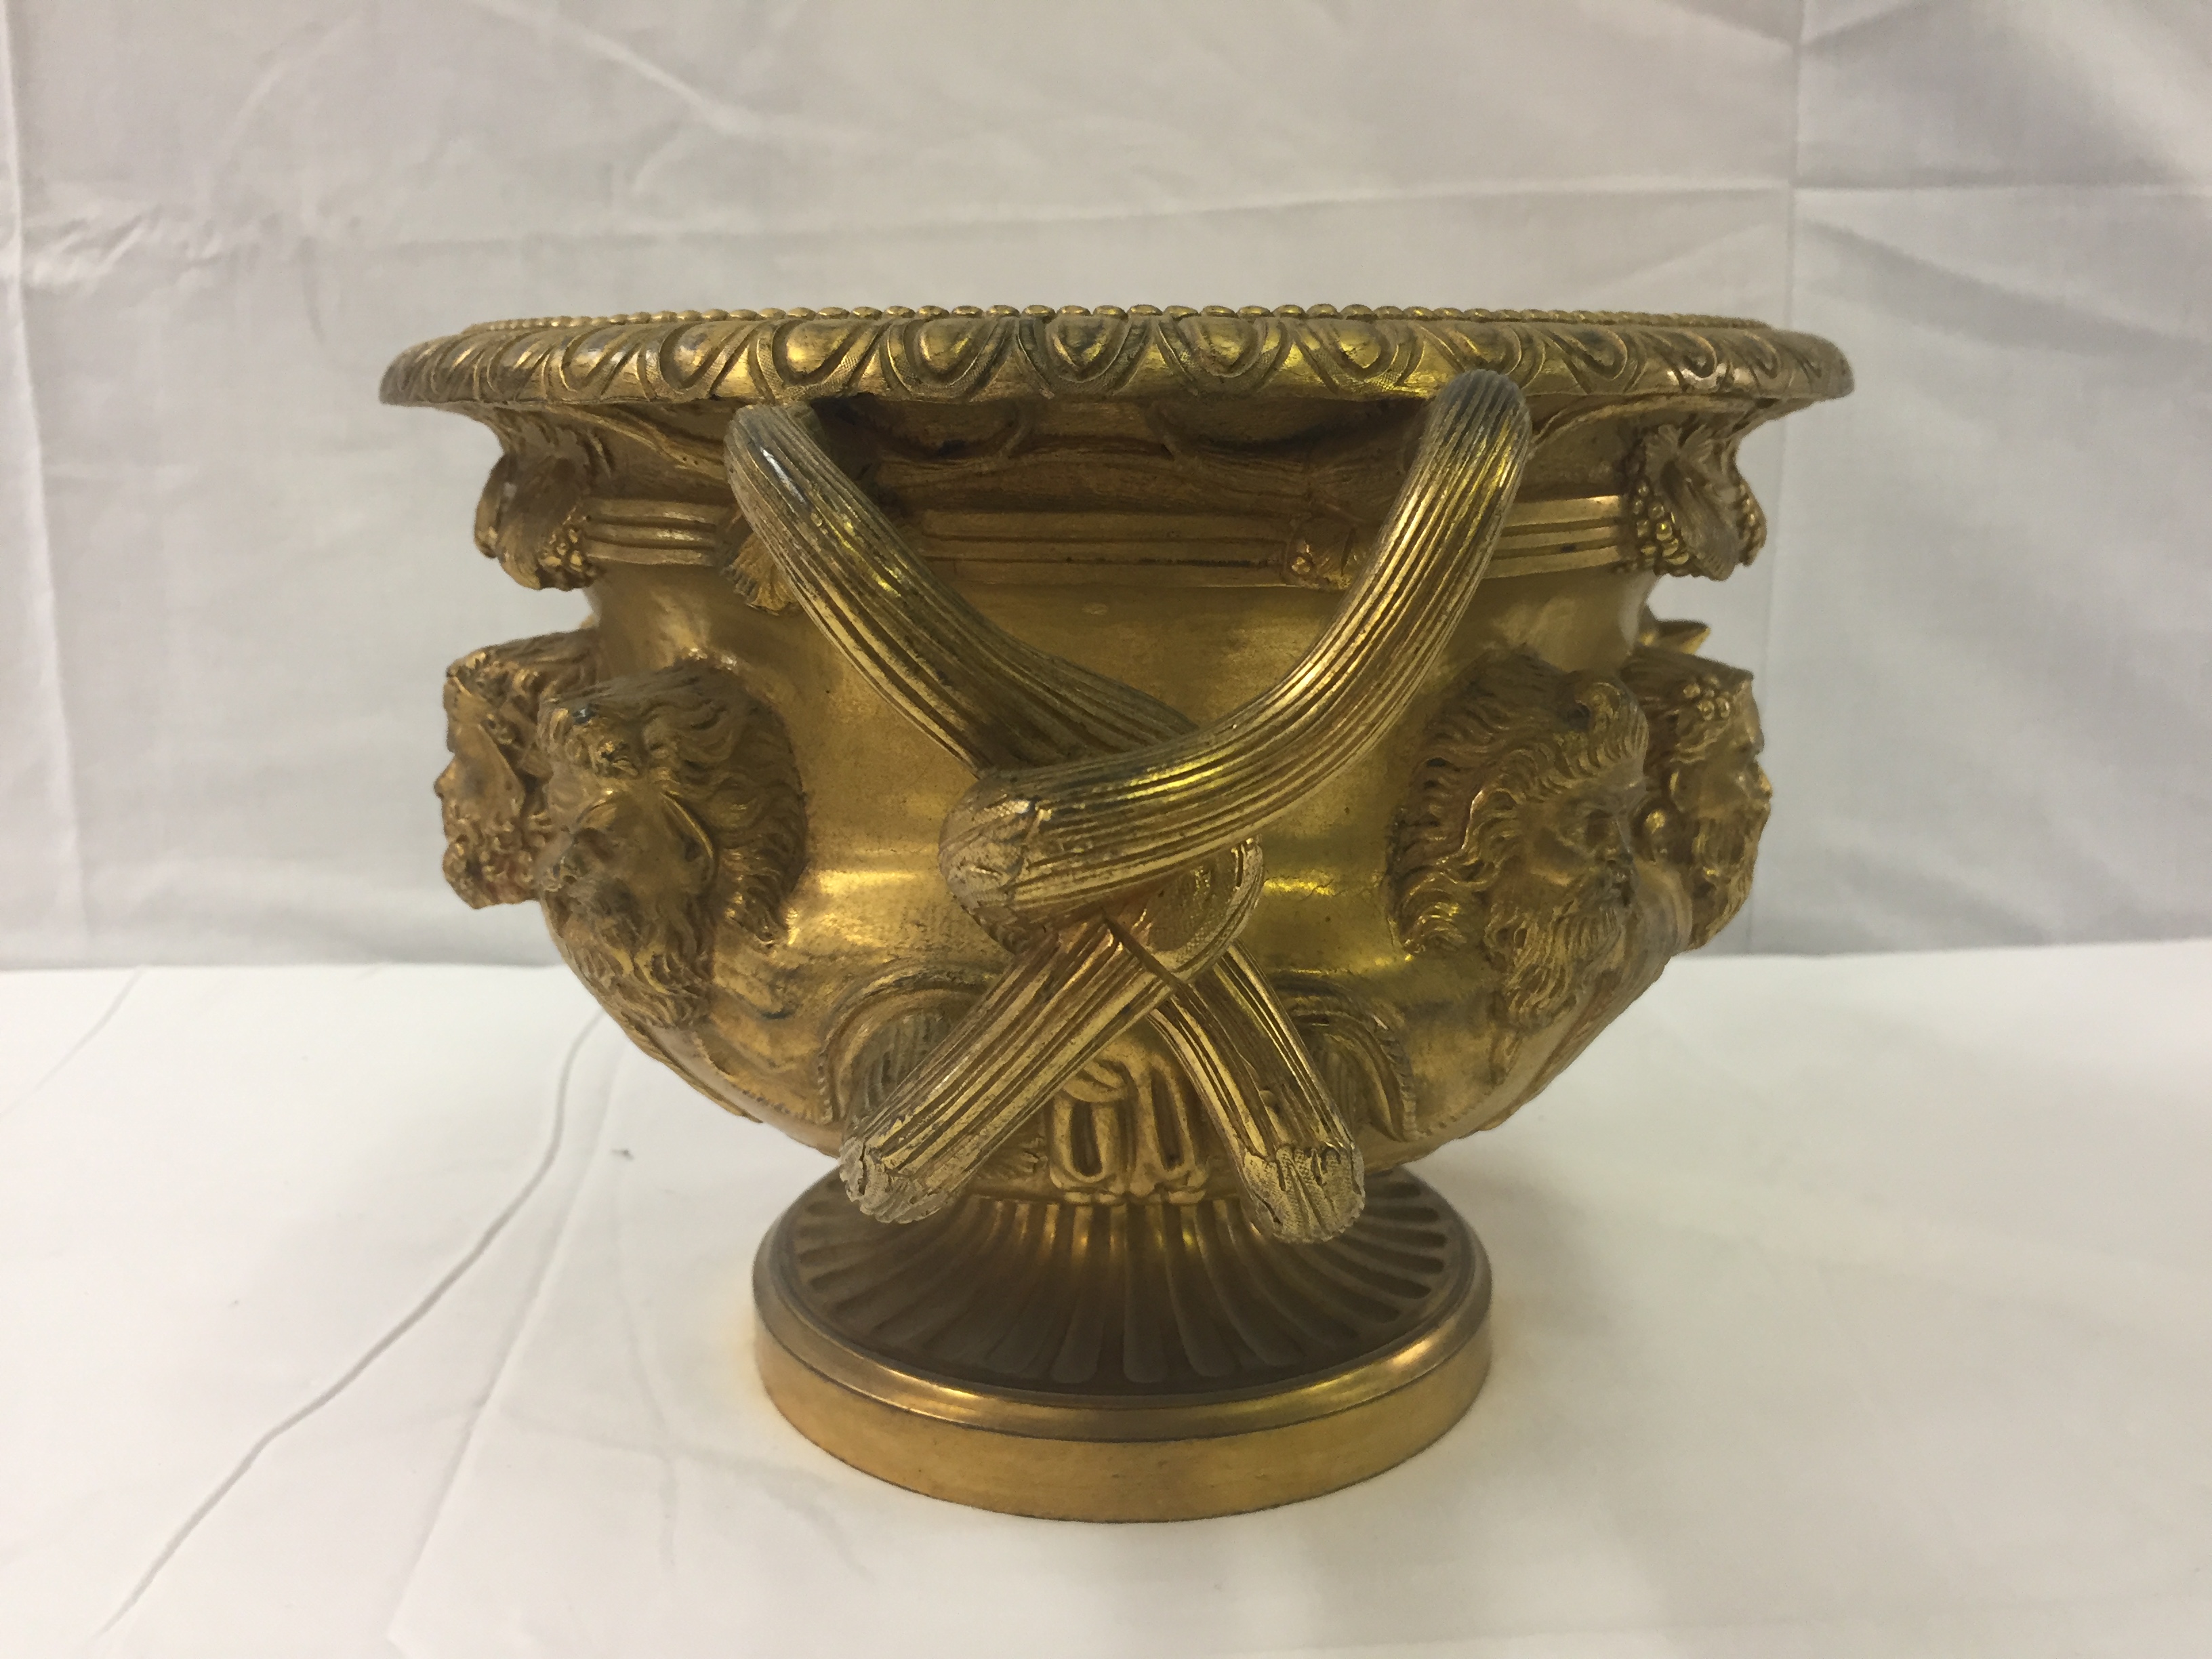 A French Gilt Bronze Model of the Warwick Vase: 19th century, with twisted handles, - Image 5 of 11